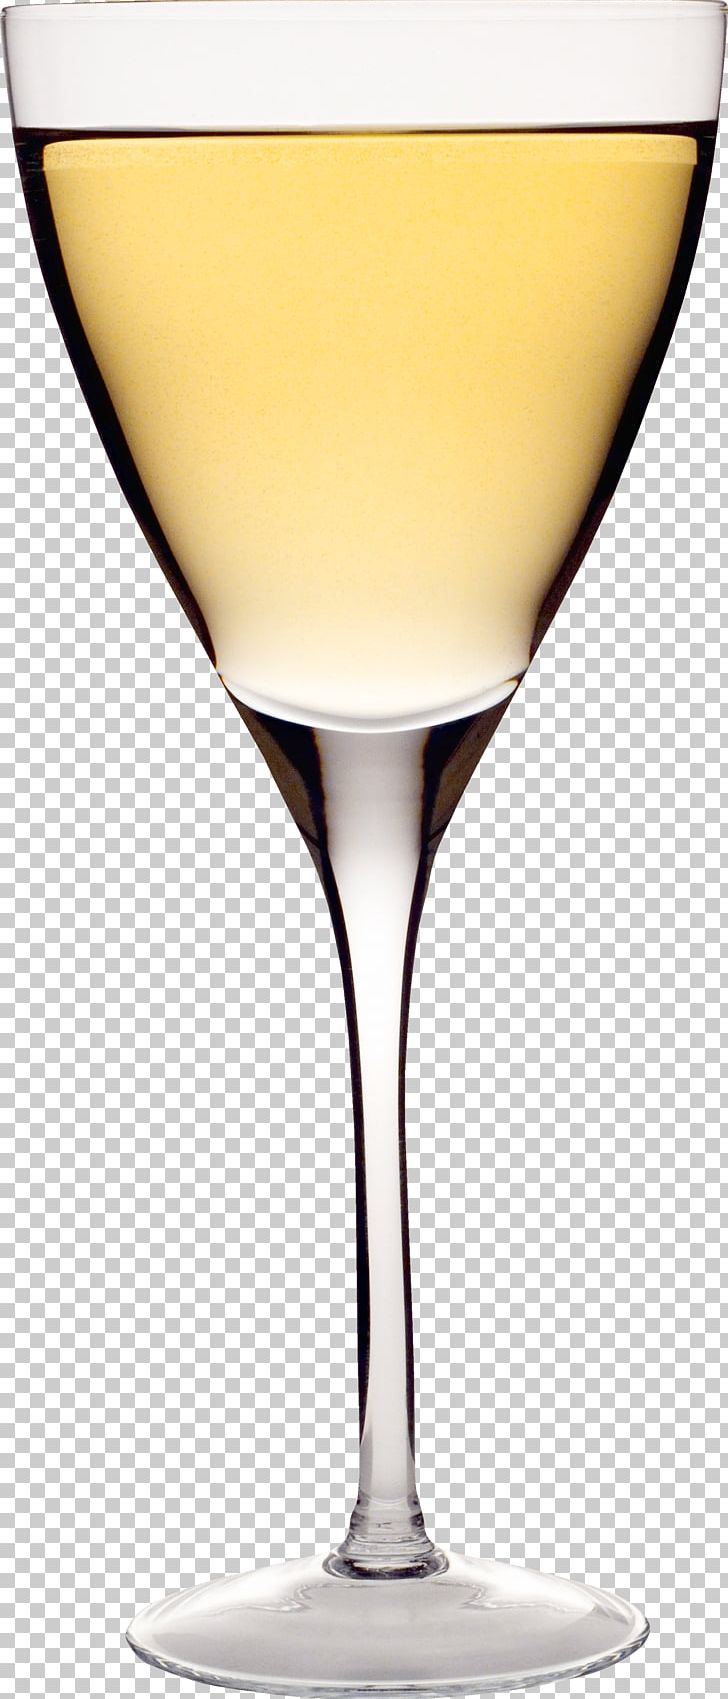 Wine Glass Champagne Cocktail Wine Cocktail Champagne Glass PNG, Clipart, Beer Glasses, Cham, Champagne, Champagne Cocktail, Champagne Stemware Free PNG Download